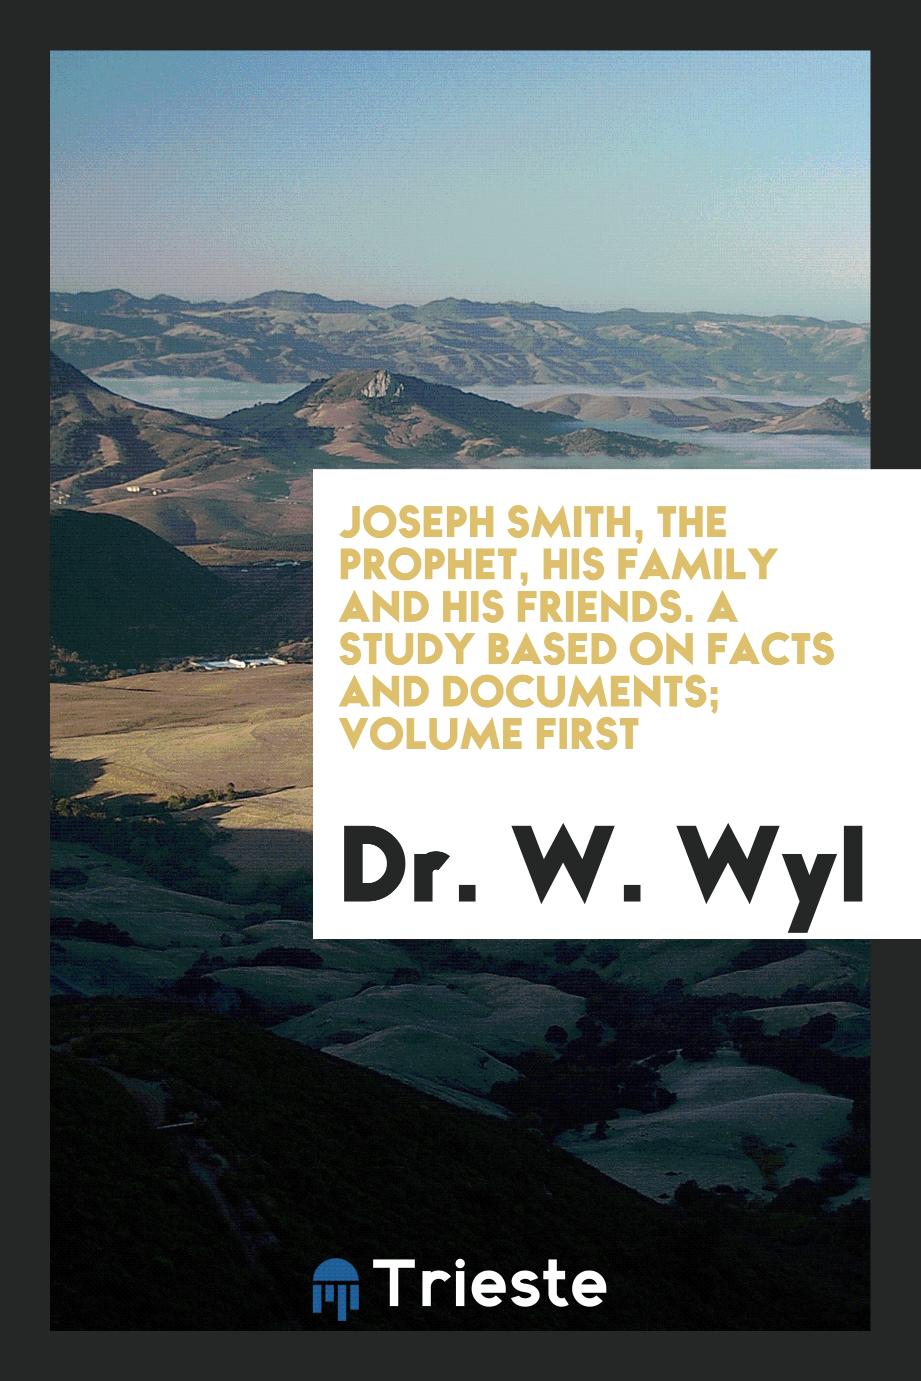 Joseph Smith, the Prophet, His Family and His Friends. A Study Based on Facts and Documents; Volume First